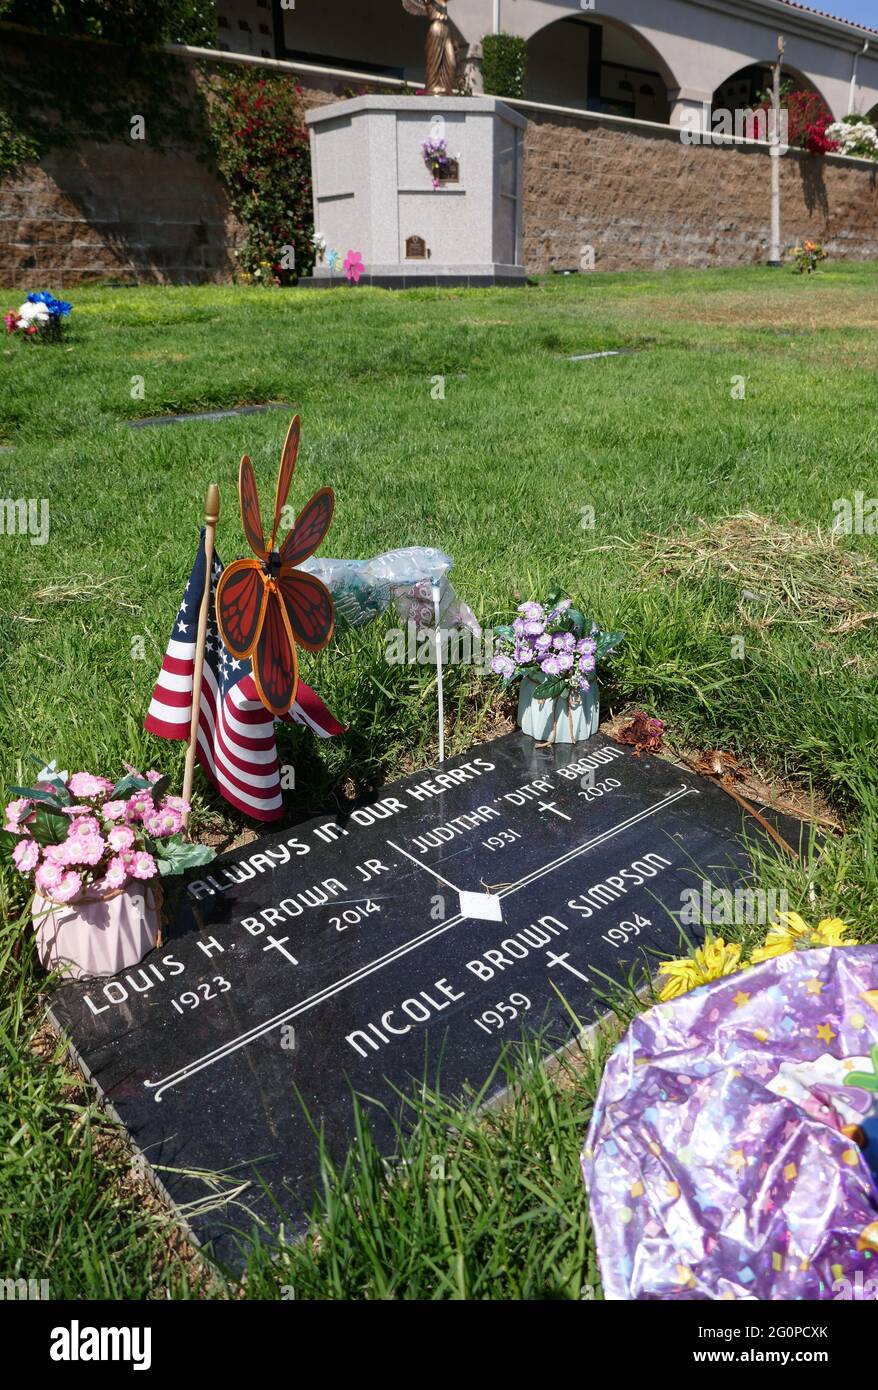 Lake Forest, California, USA 2nd June 2021 A general view of atmosphere of Murder Victim Nicole Brown Simpson's Grave with her parents Louis Brown and Judith Brown's Graves at Ascension Cemetery on June 2, 2021 in Lake Forest, California, USA. Photo by Barry King/Alamy Stock Photo Stock Photo